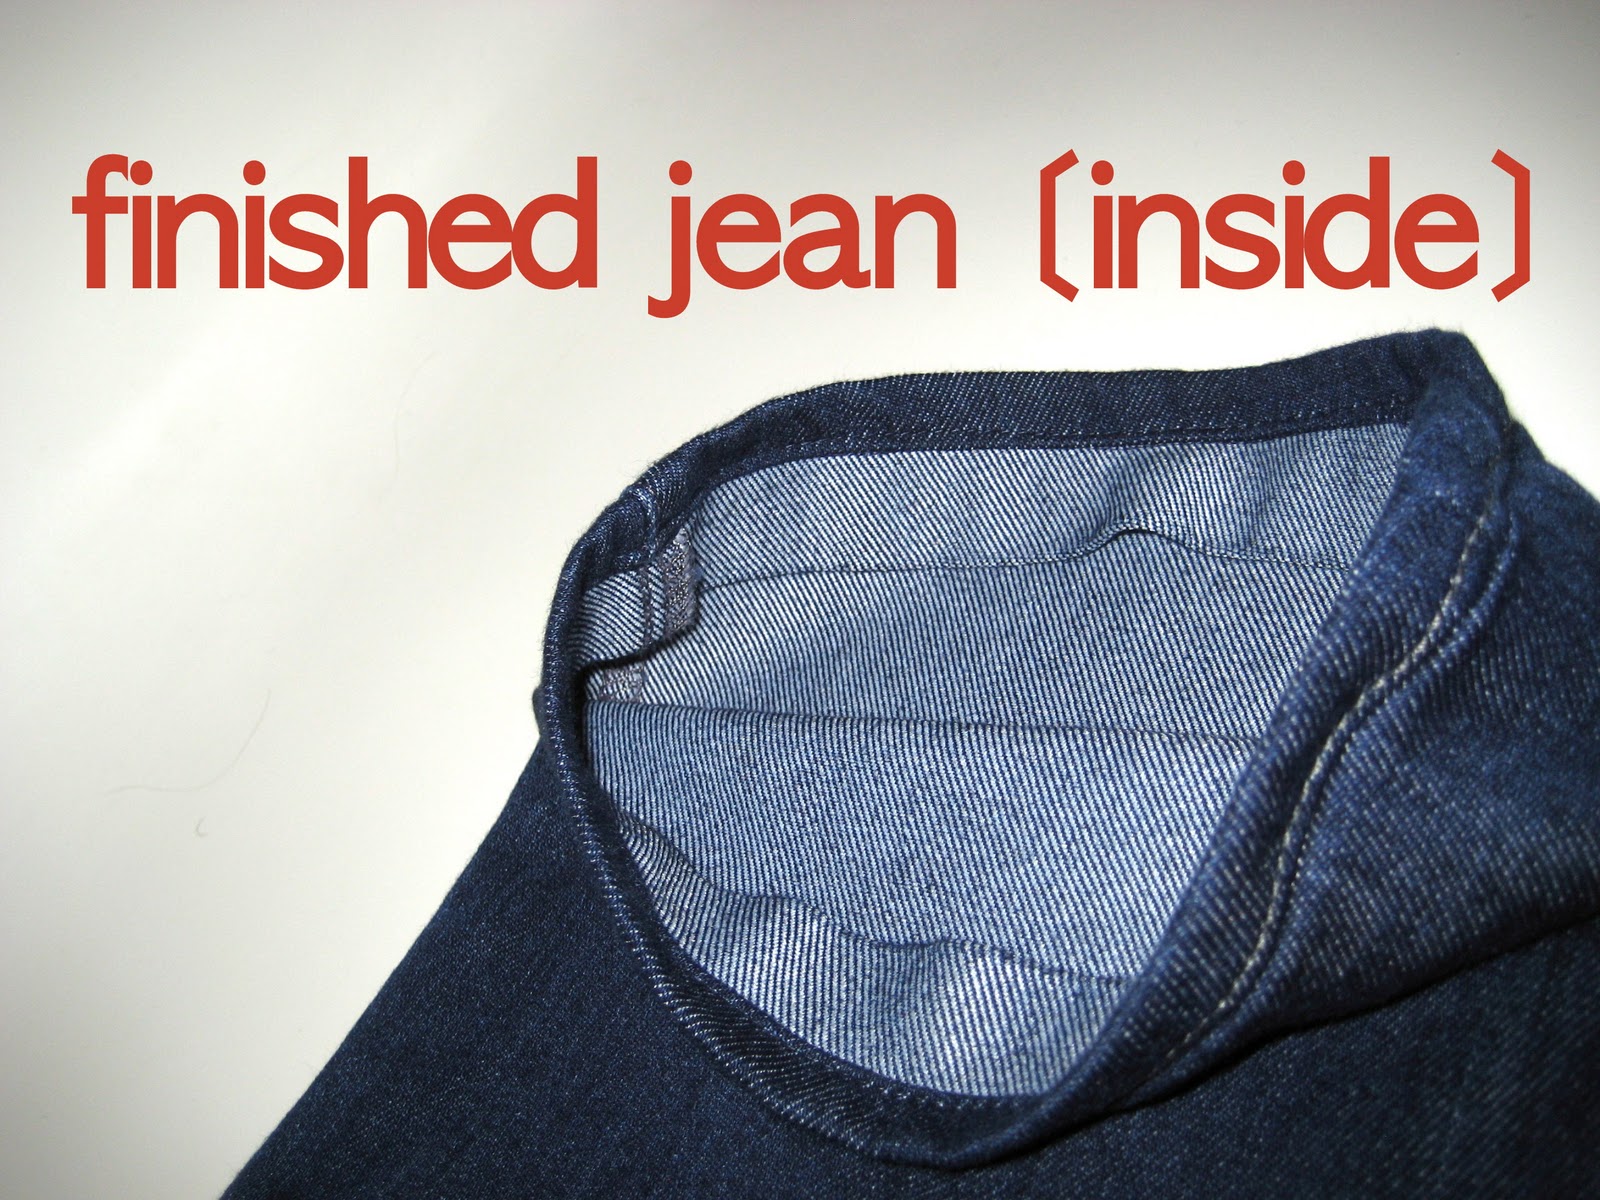 How to Hem Your Own Jeans, and Keep the Original Hem